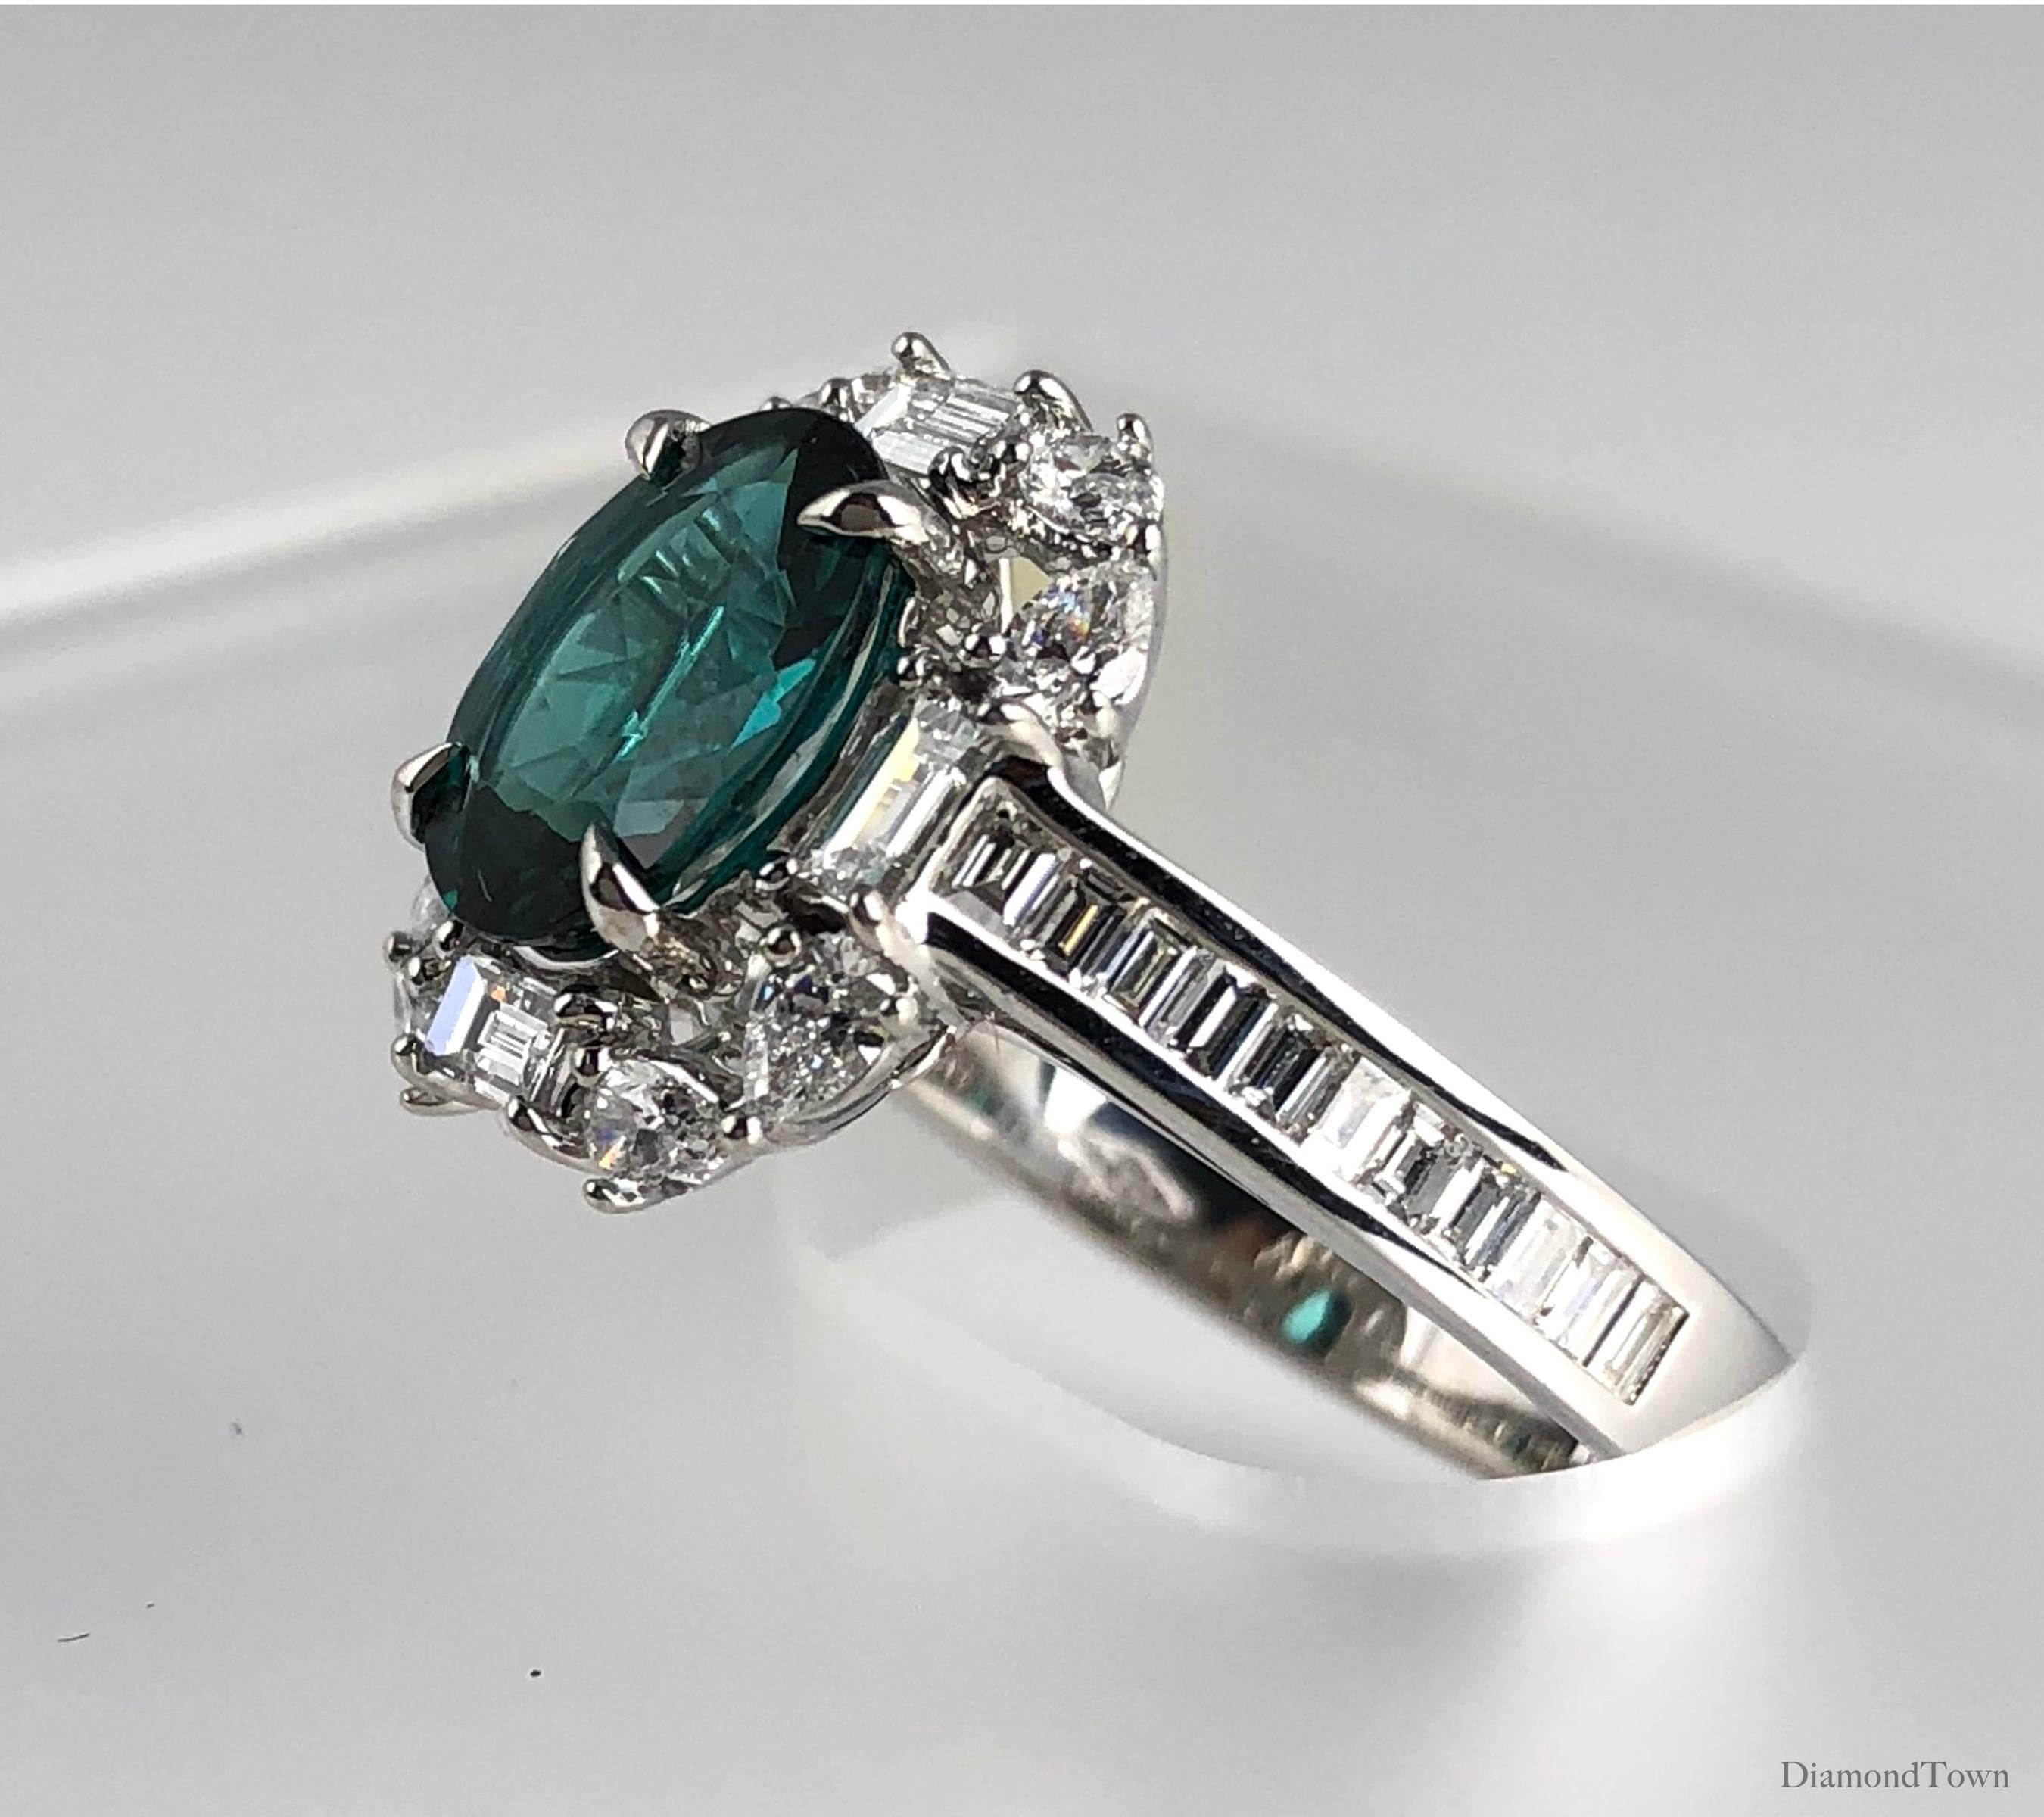 This handcrafted cluster ring features a 1.84 carat Exotic Green Tourmaline oval center, surrounded by a halo of white diamonds, and additional baguette diamonds trailing down the side shank. The total diamond weight is 1.19 carats.

Ring size 6.75,